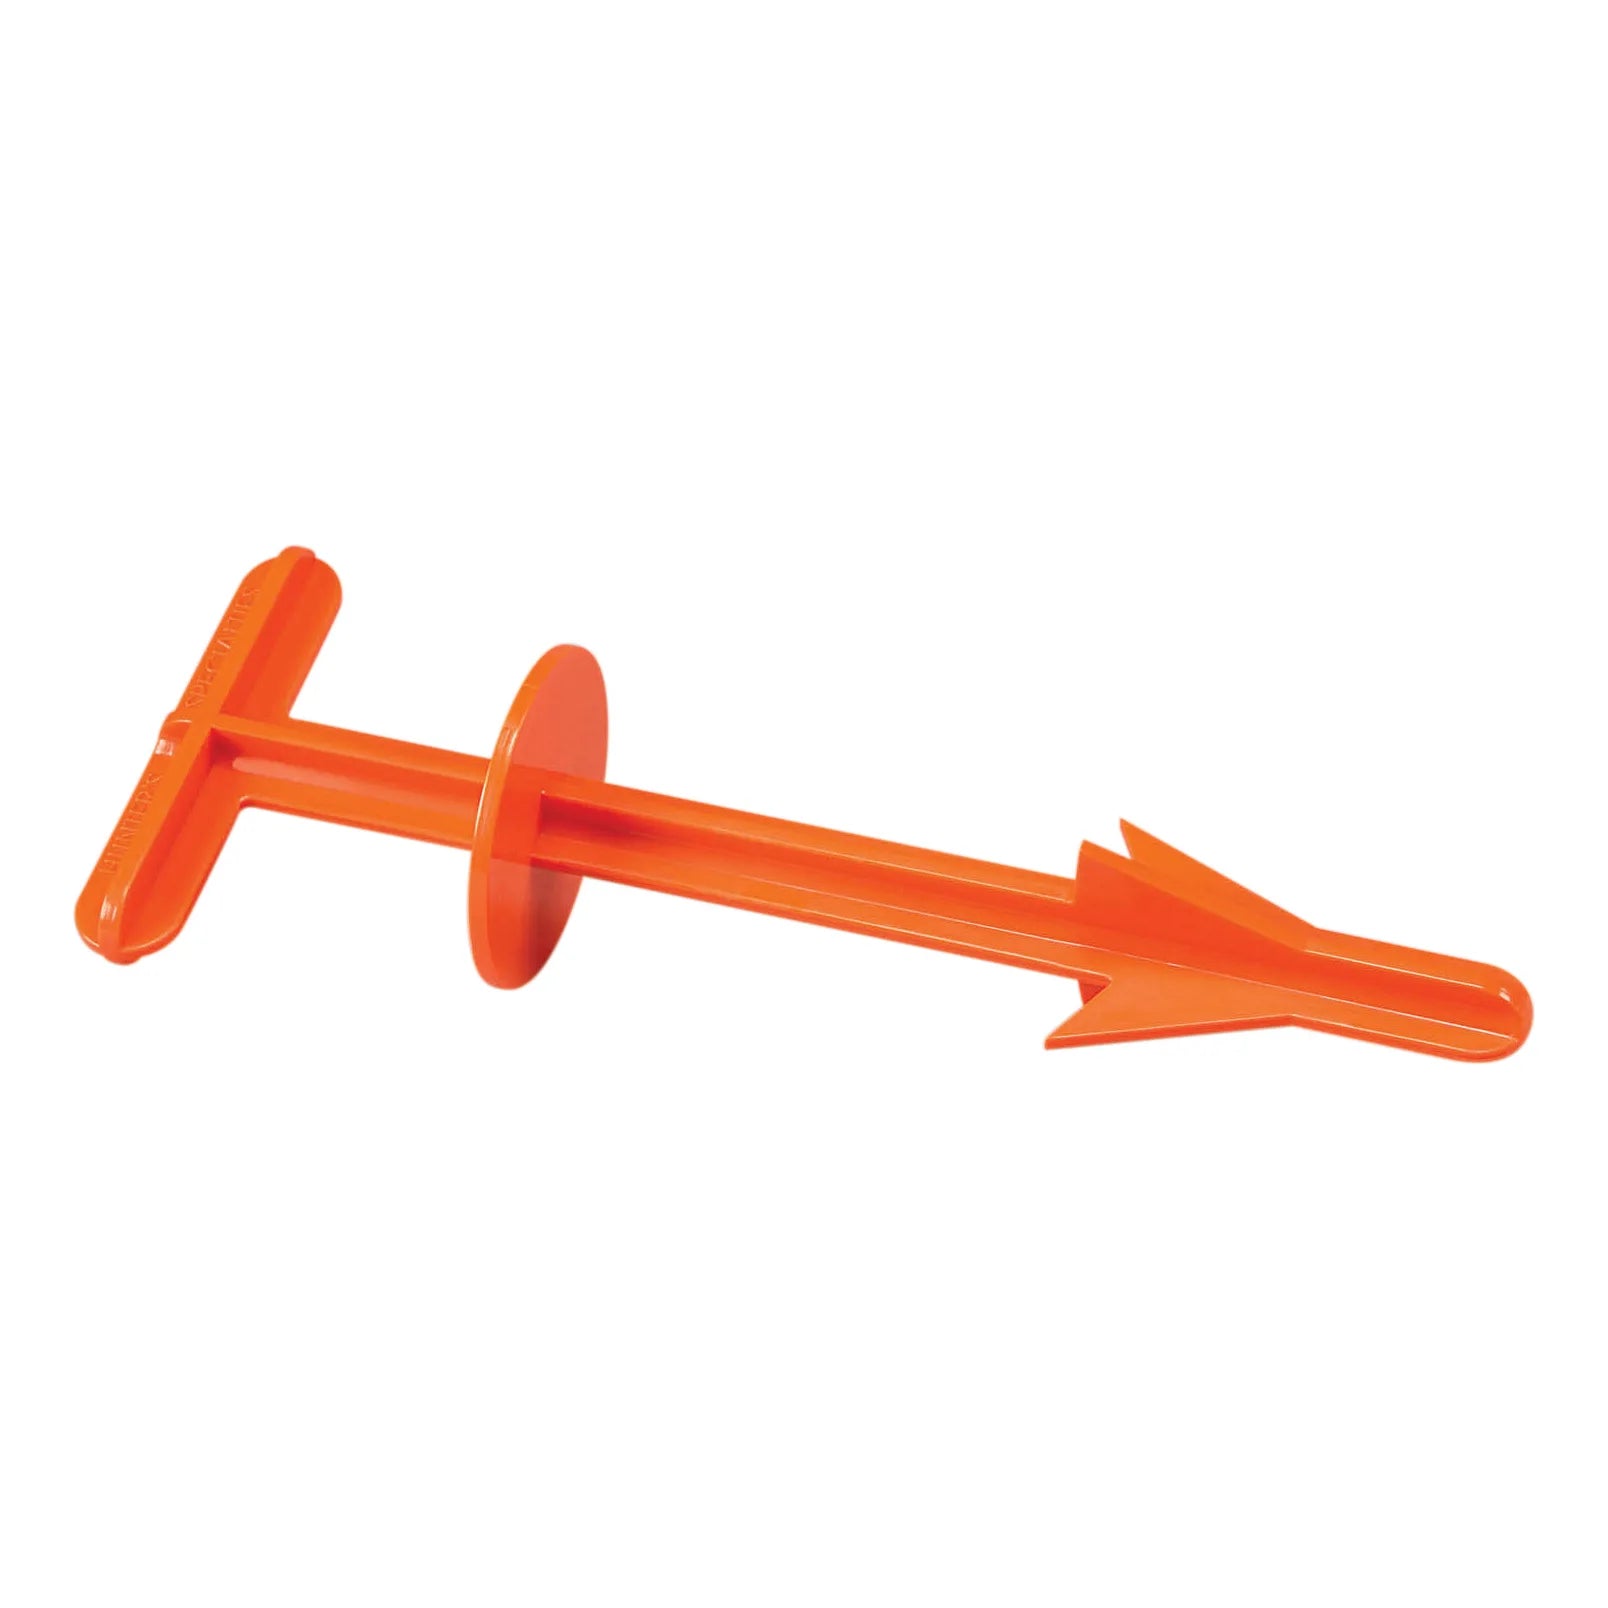 HUNTERS SPECIALTIES Butt Out Field Dressing Tool